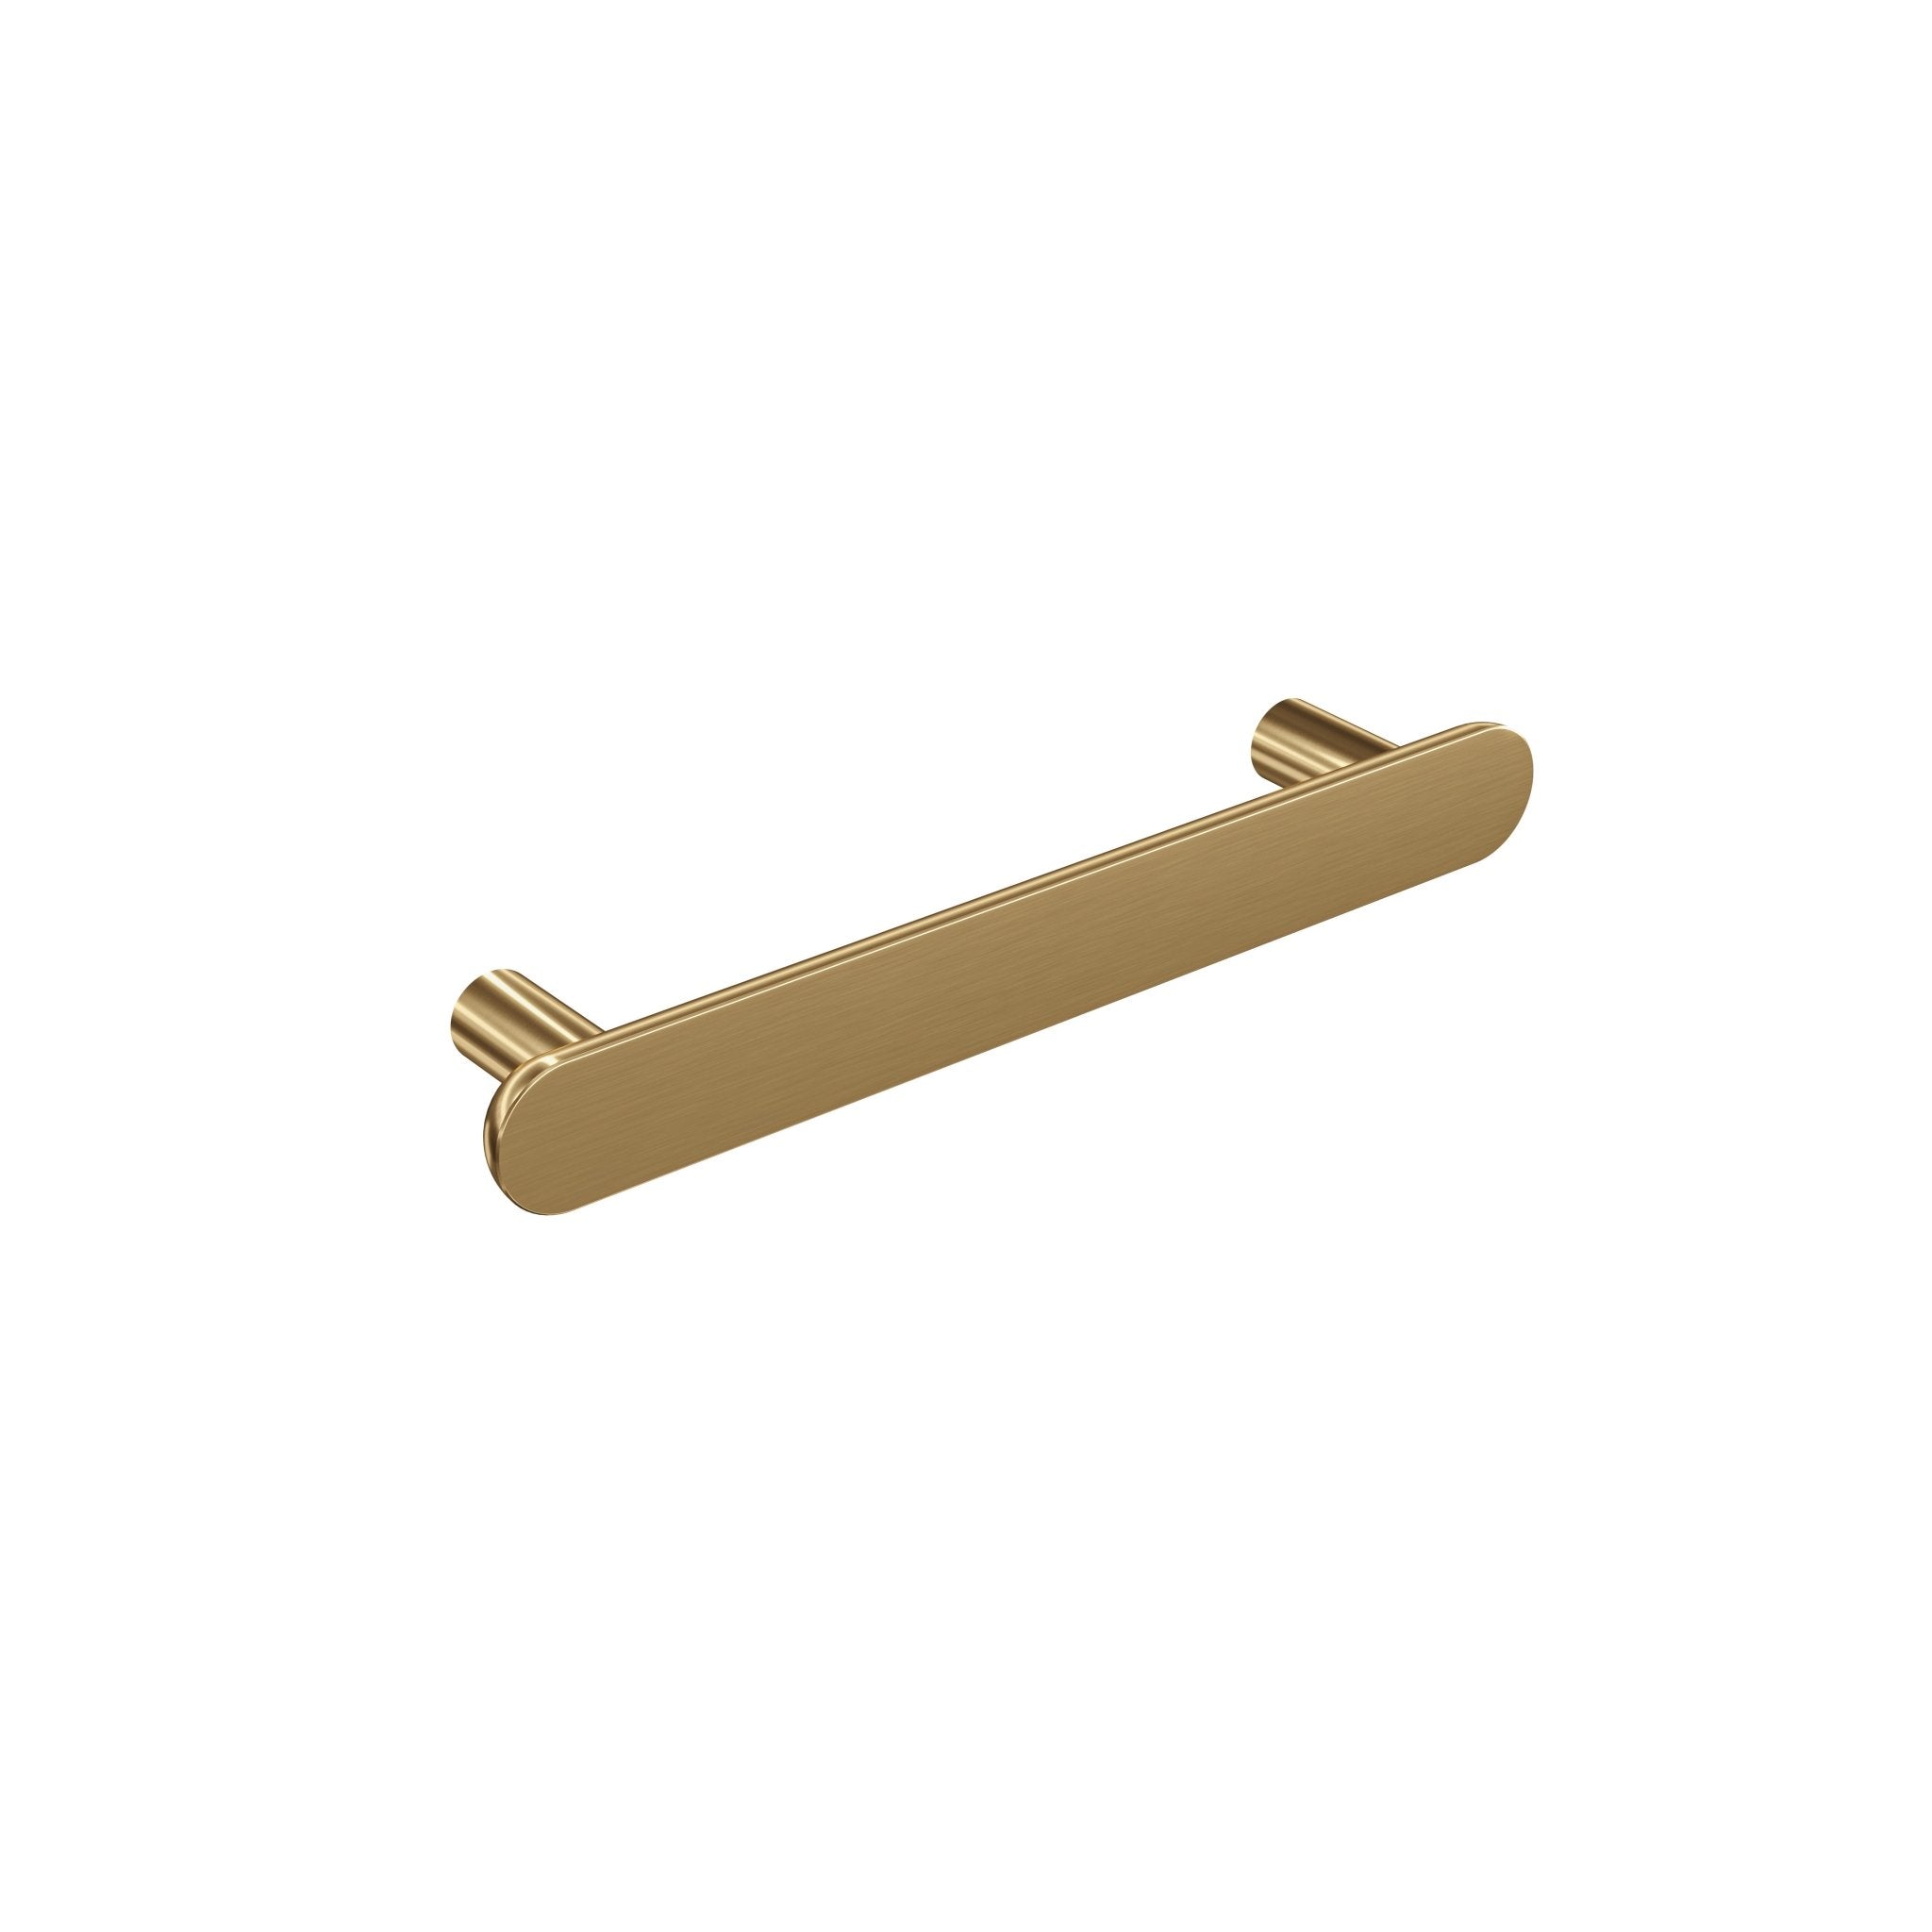 Bar Trim Pull Handle-Brushed Brass-165mm-The Hairpin Leg Co.